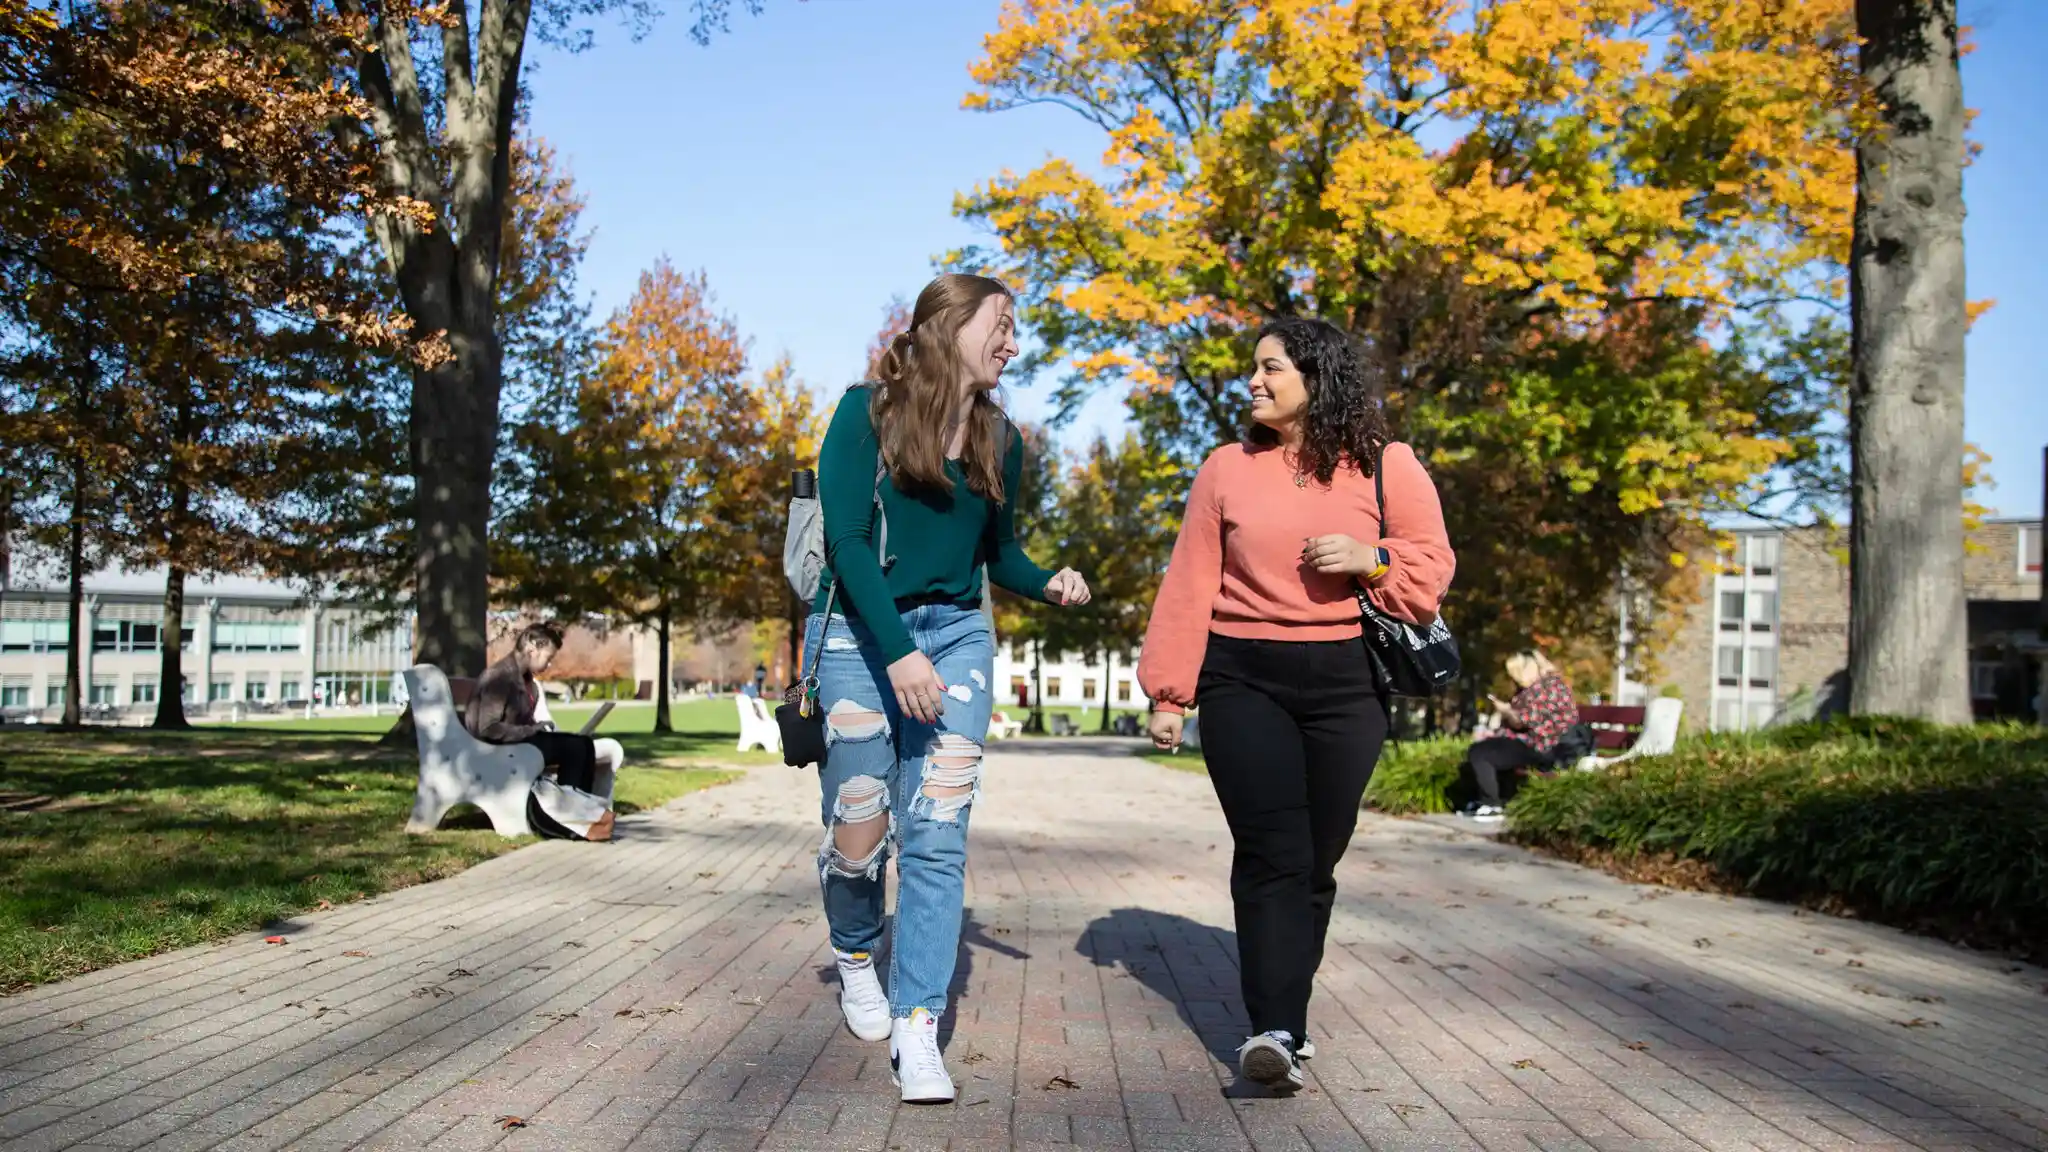 Two students go for a walk in the fall at school.